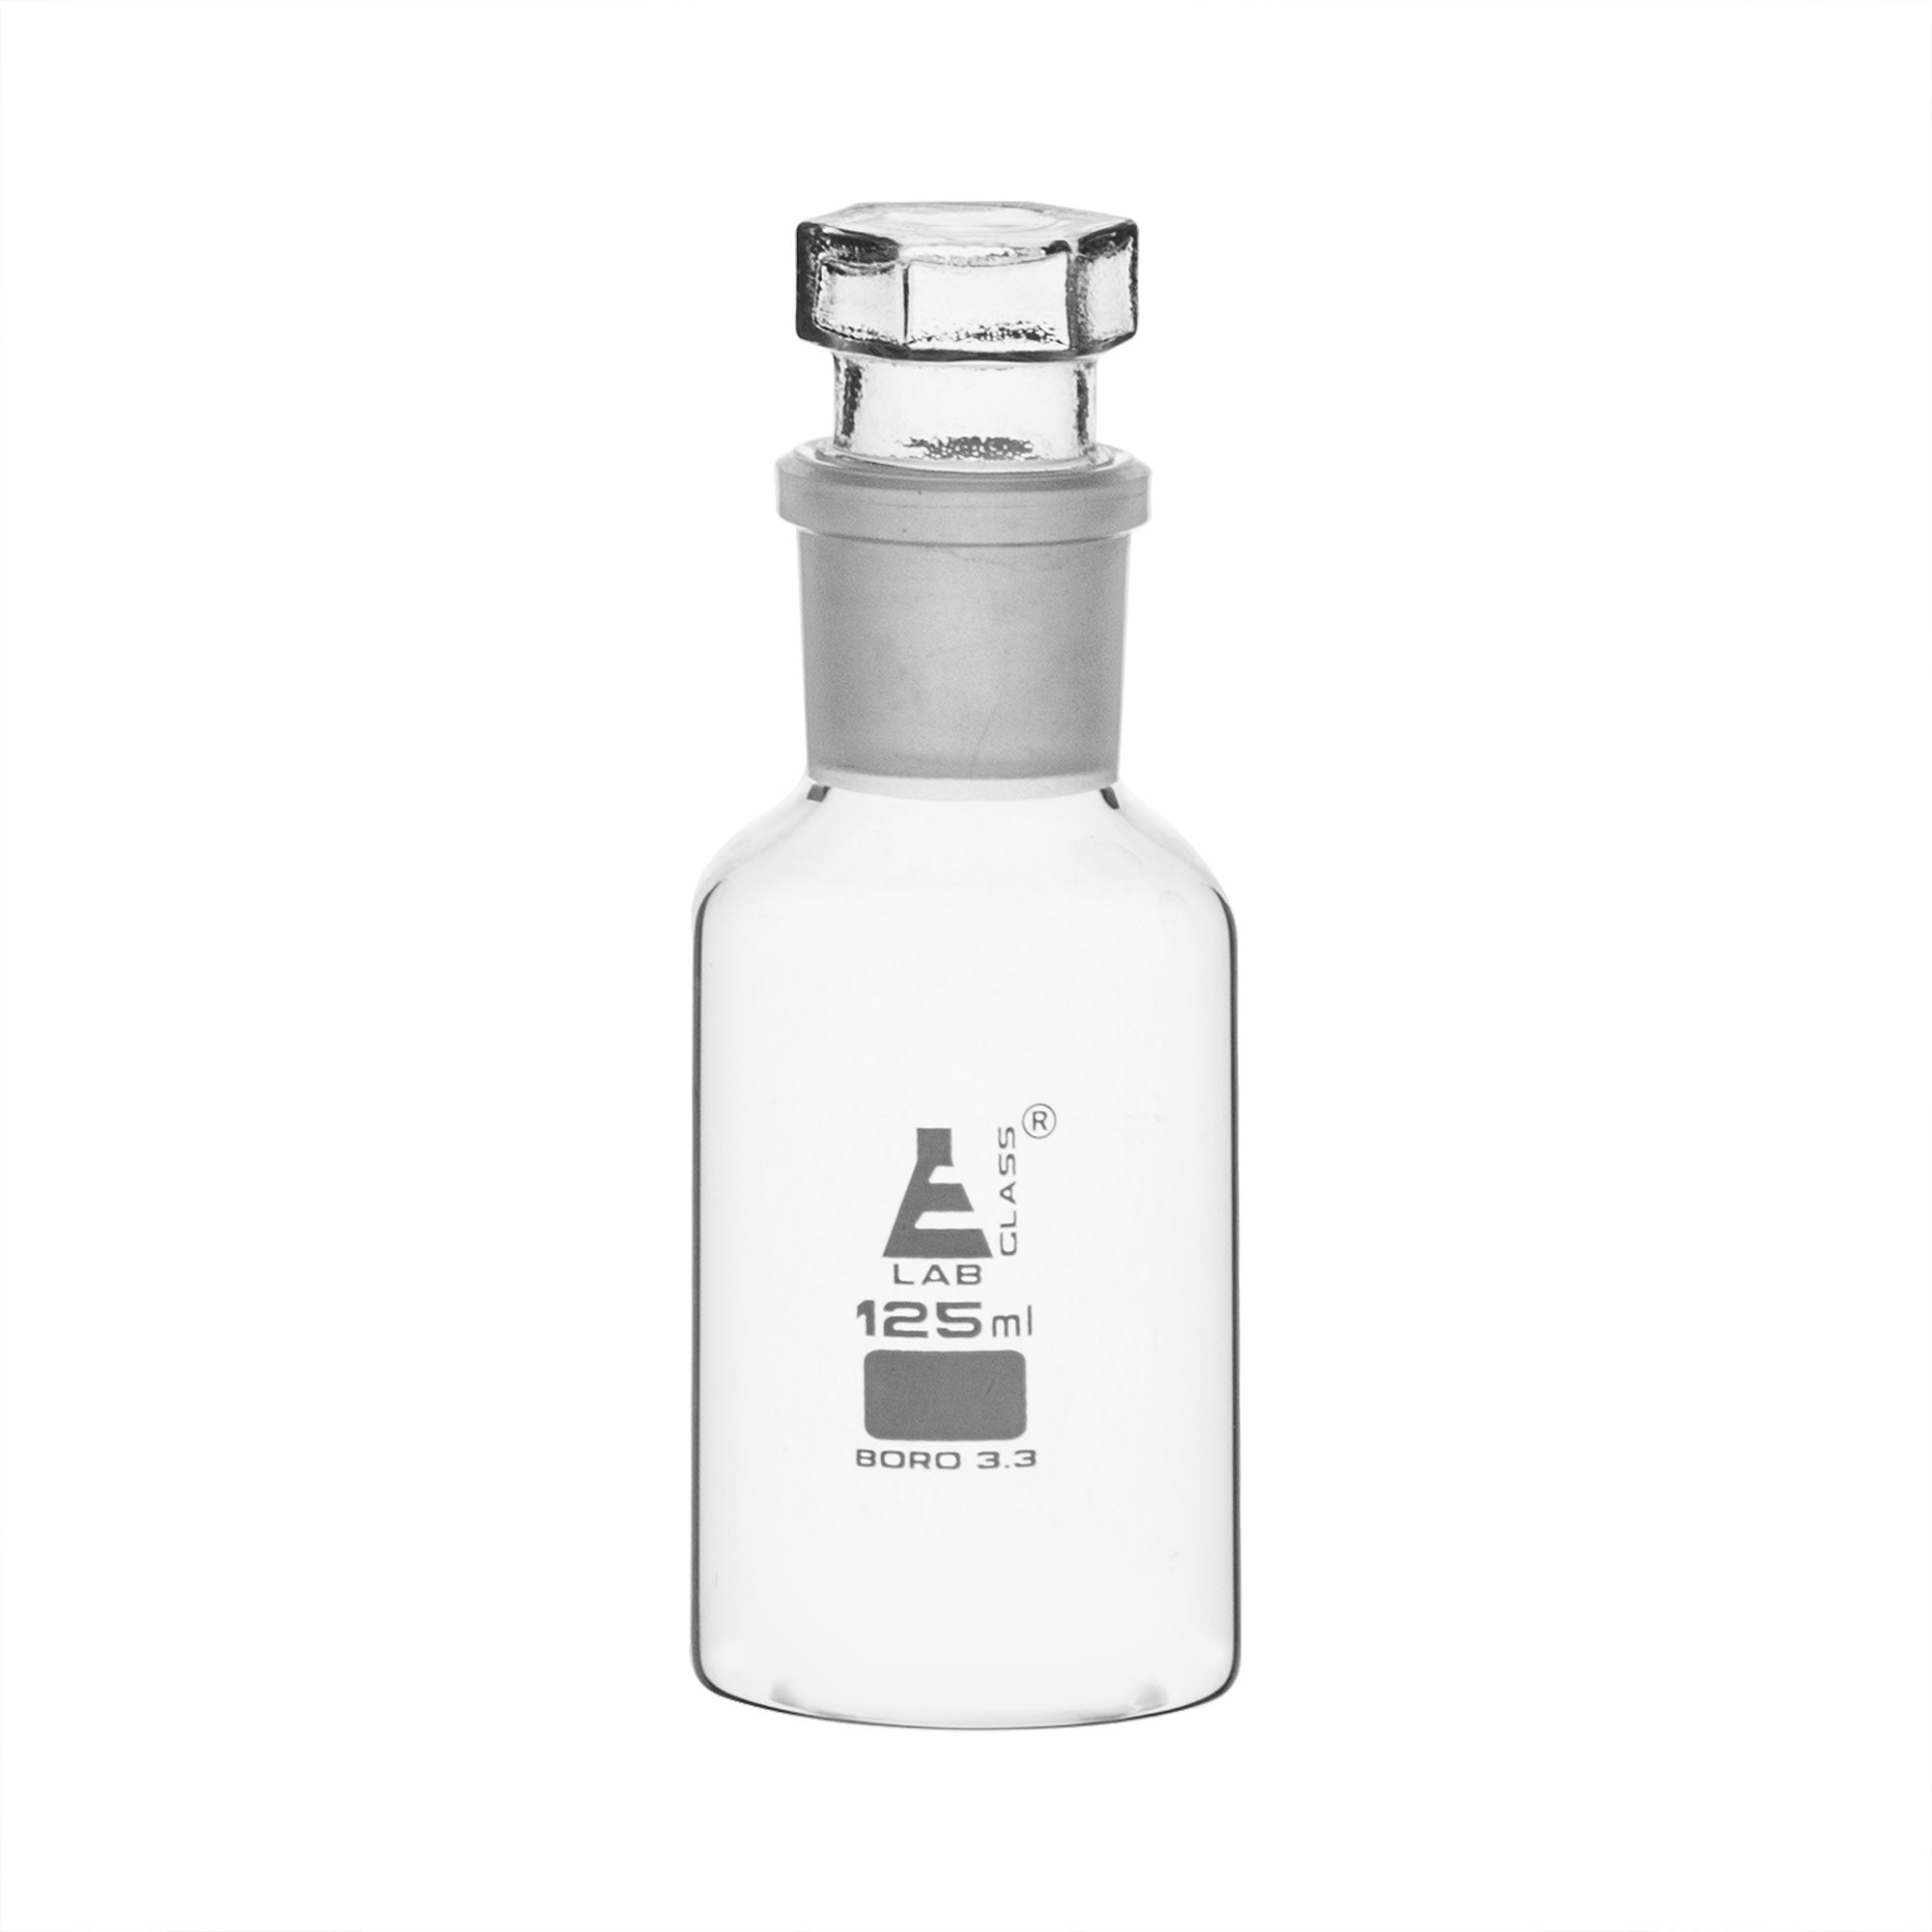 Clear Borosilicate Glass Reagent Bottle with Hollow Glass Stopper, 125 ml, Wide Mouth, Autoclavable